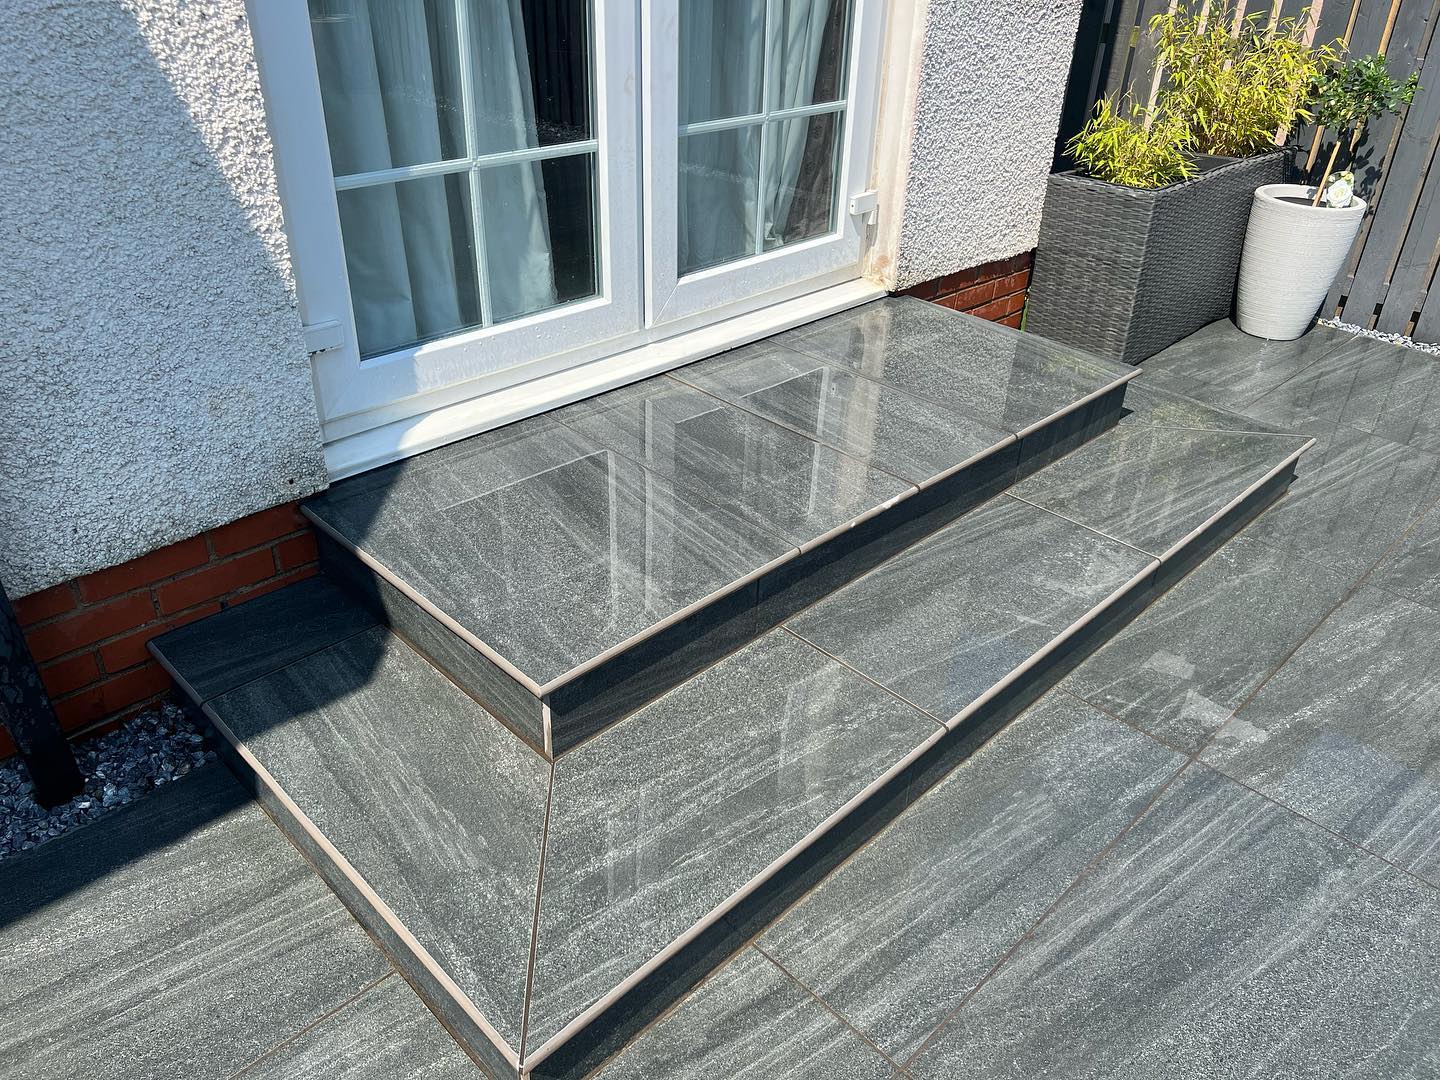 Smokey jewel porcelain patio installed with curving path , granite set border and new steps with a bullnose finish